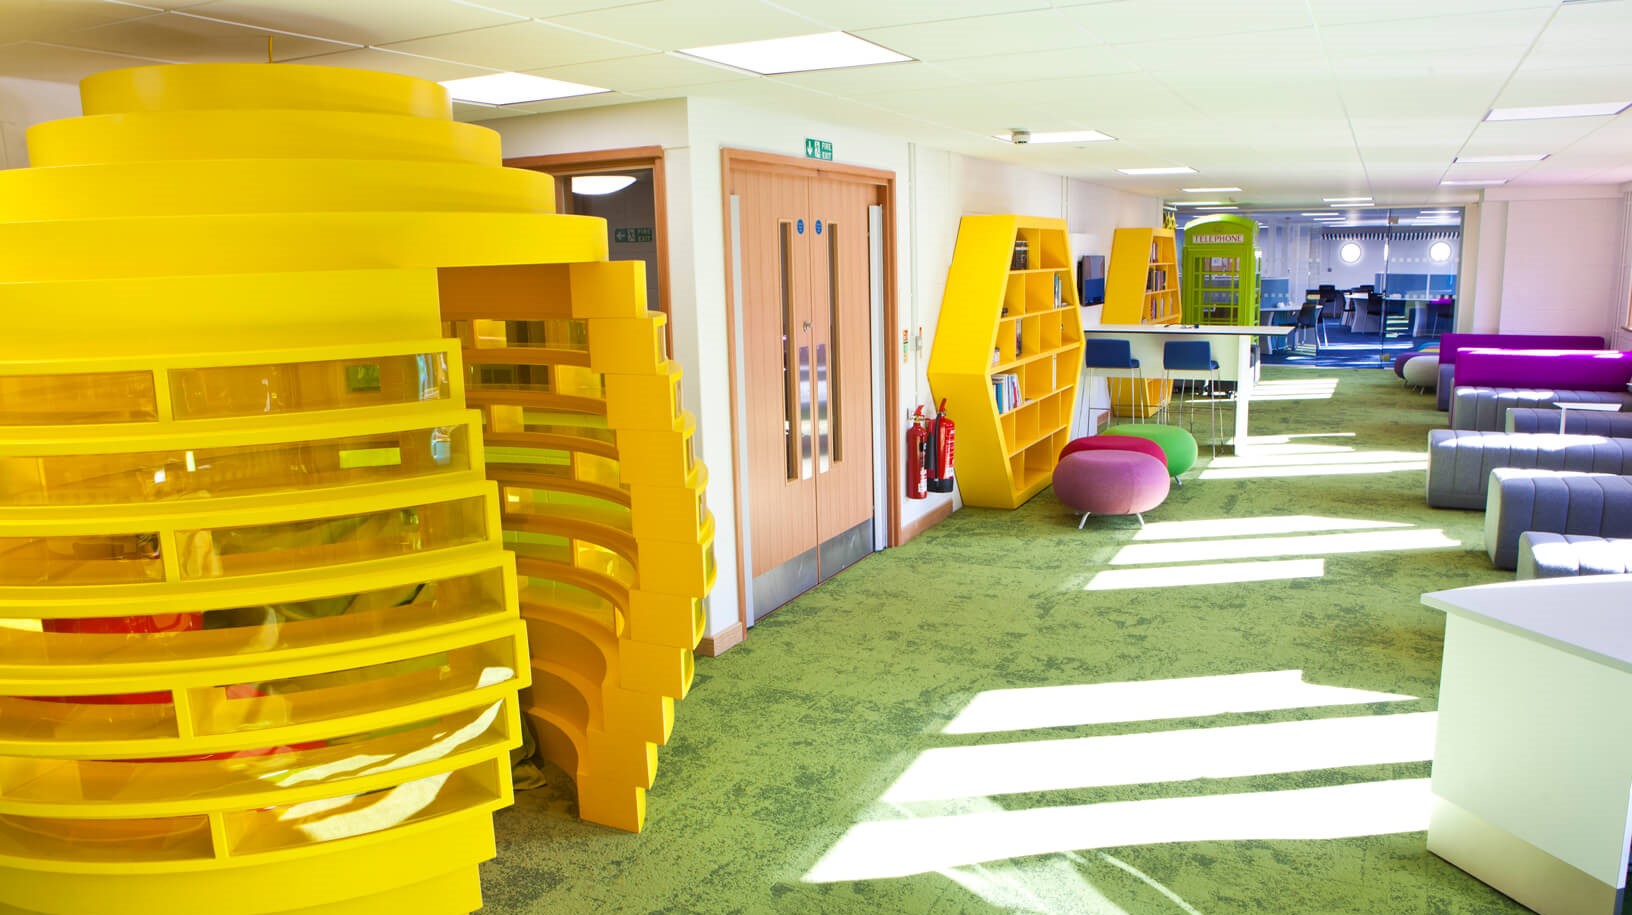 Bespoke Furniture And Pods For Schools